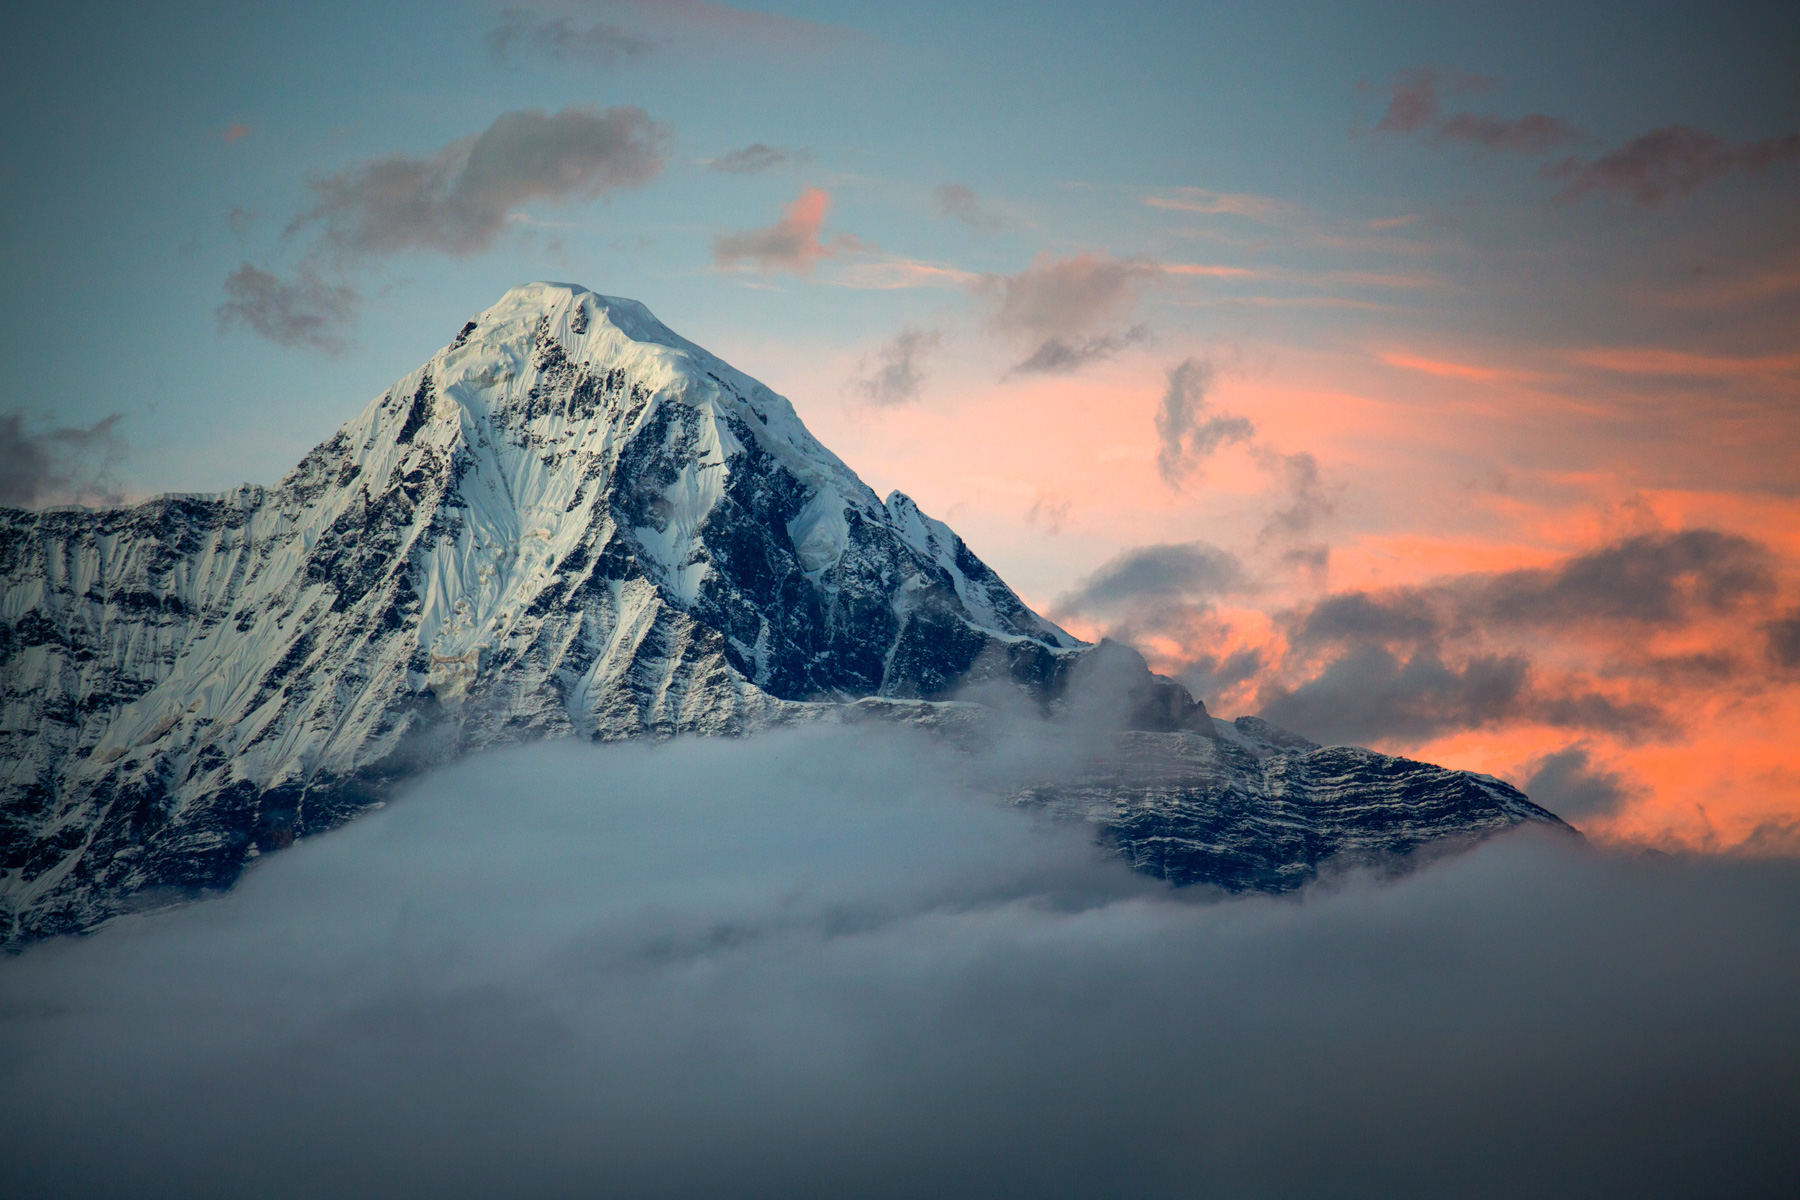 A snow-covered mountain at sunrise